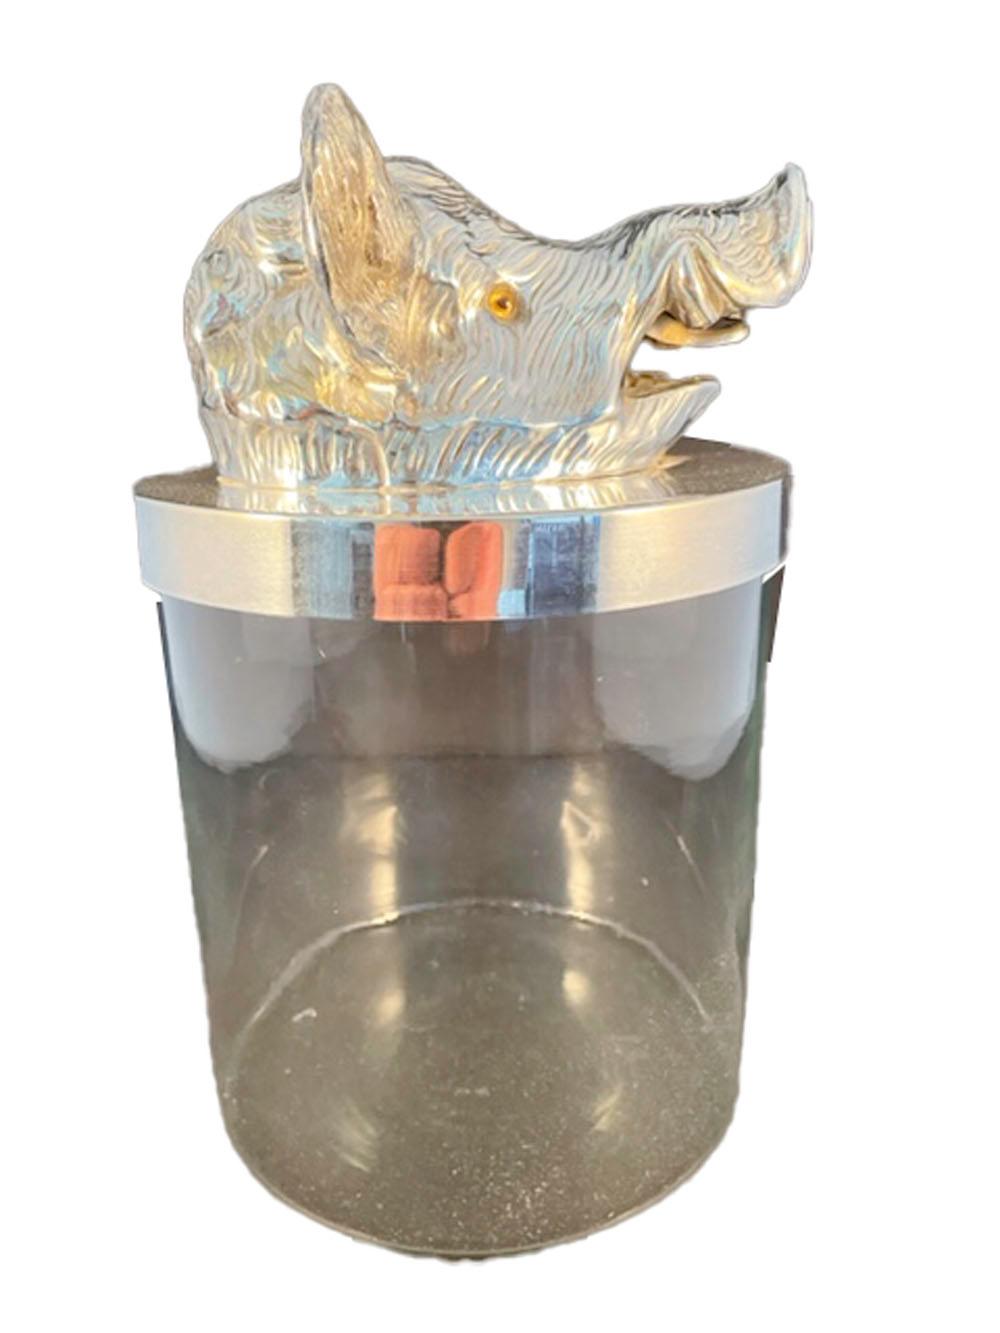 Vintage clear glass jar of cylindrical form with a silver plate rim and lid. The lid with a model of a Boar's head with glass eyes. Attributed to Valenti, Spain.